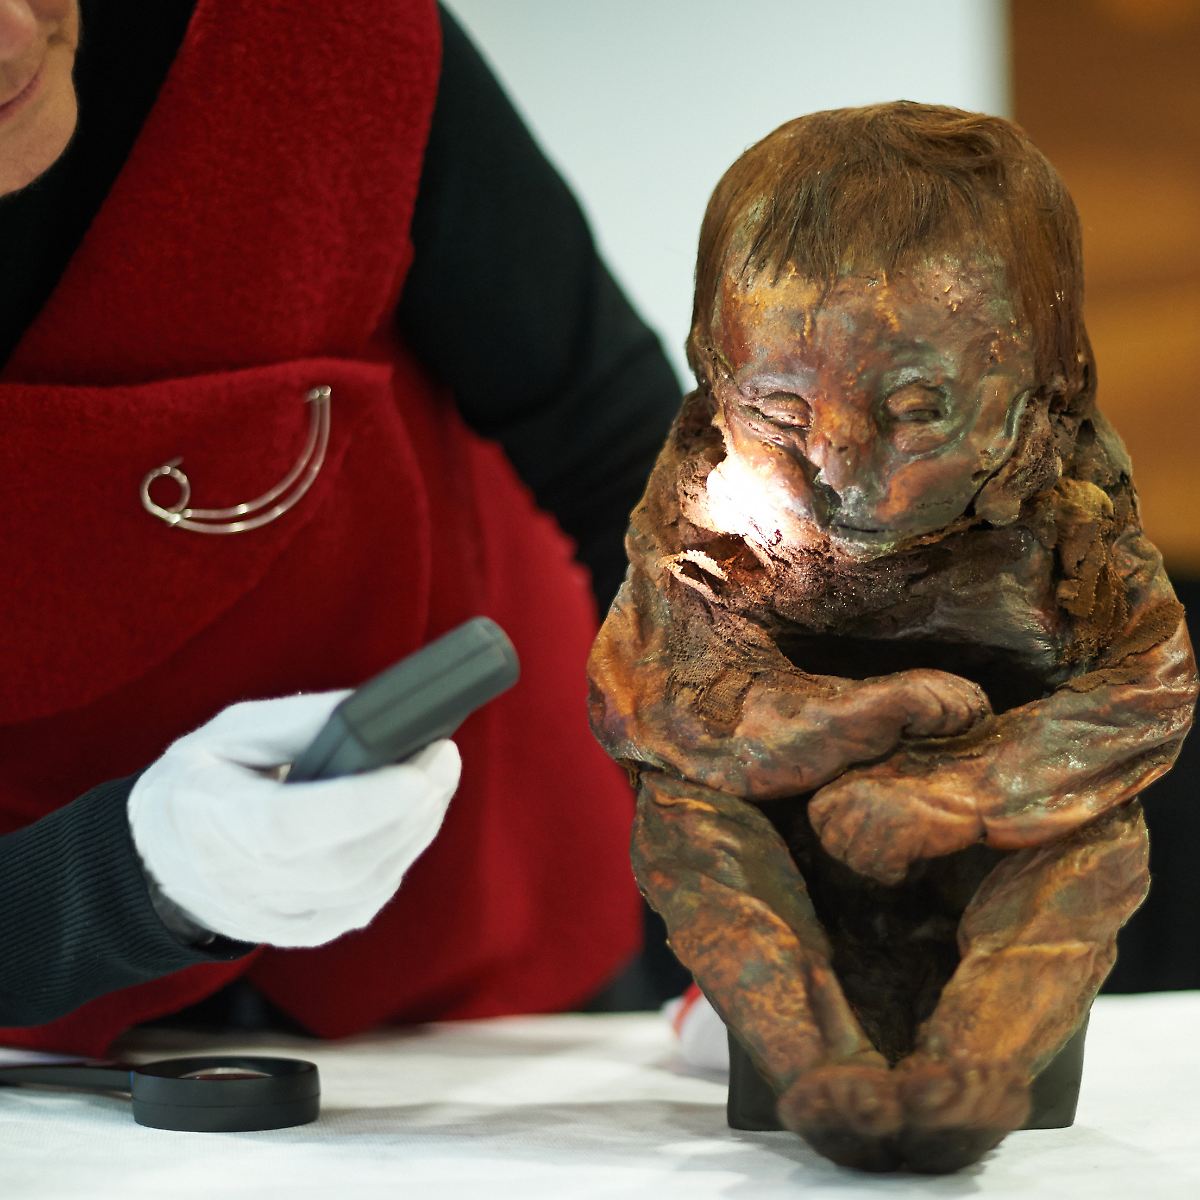 The Detmold Child – A Peruvian Child Mummy more than 6,500 years old found wrapped in linen and buried with an amulet hung around its neck. - NY DAILY